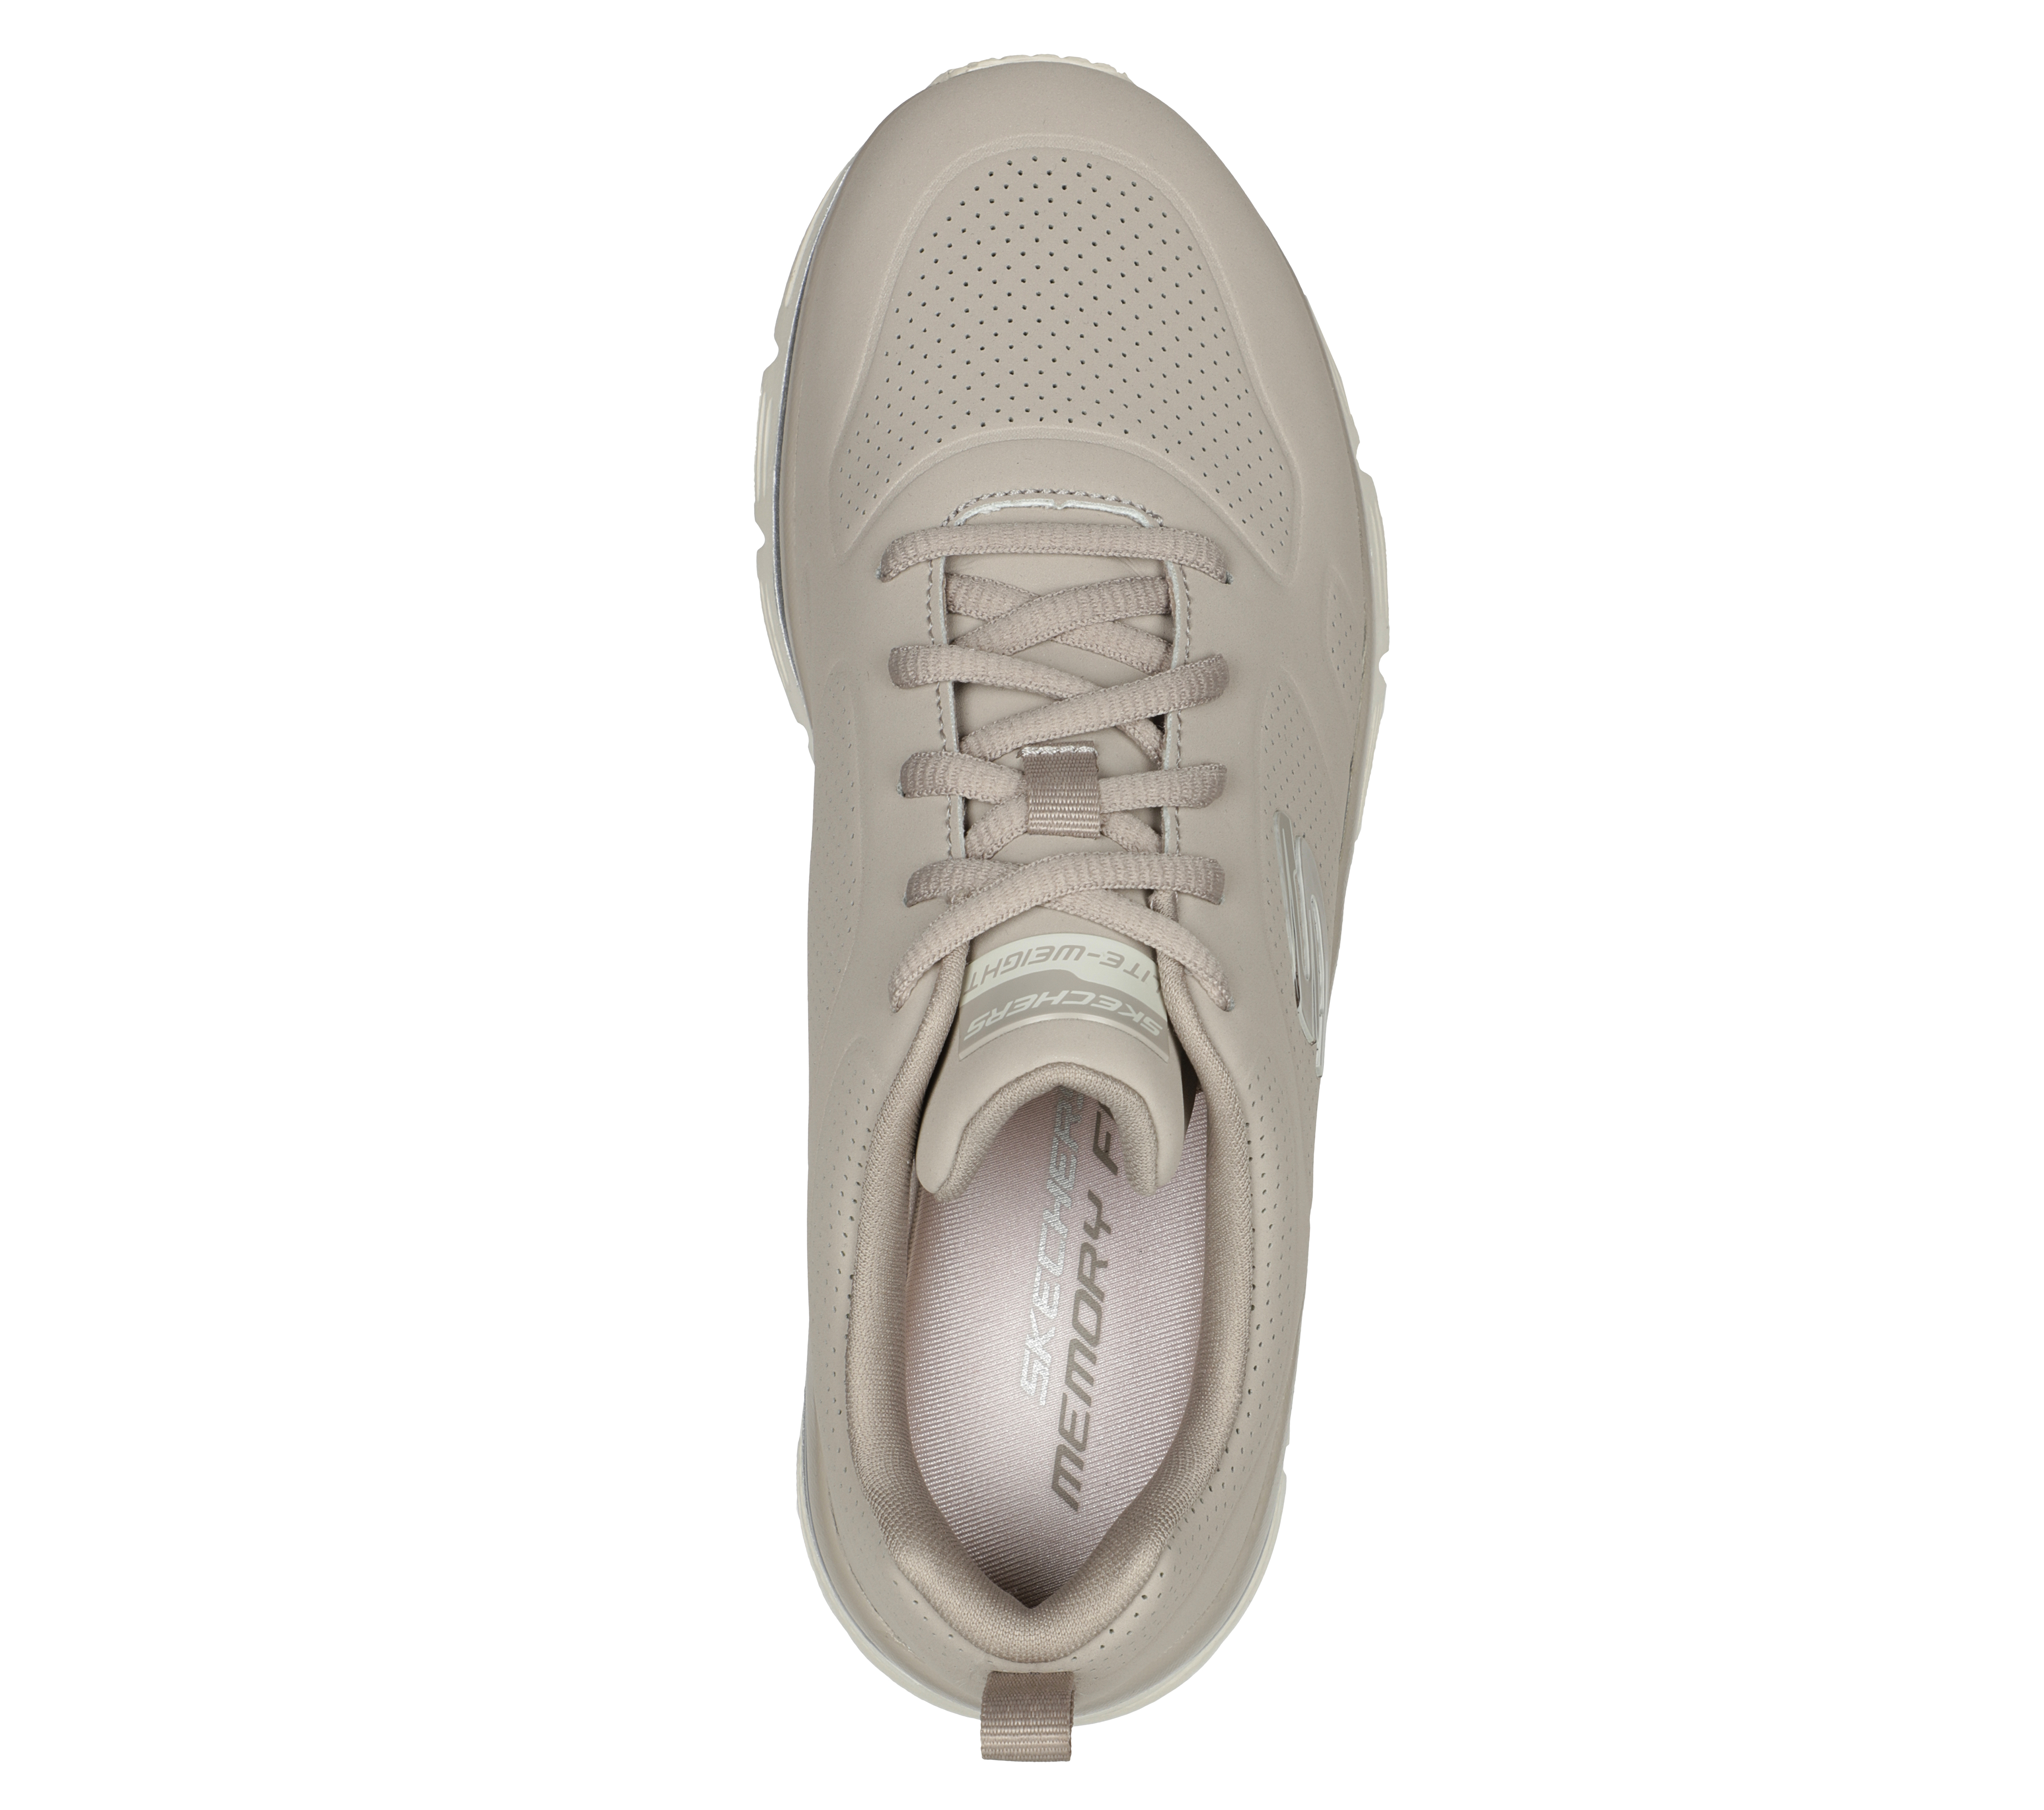 Zapatillas para mujer SKECHERS 149748-tpe taupe